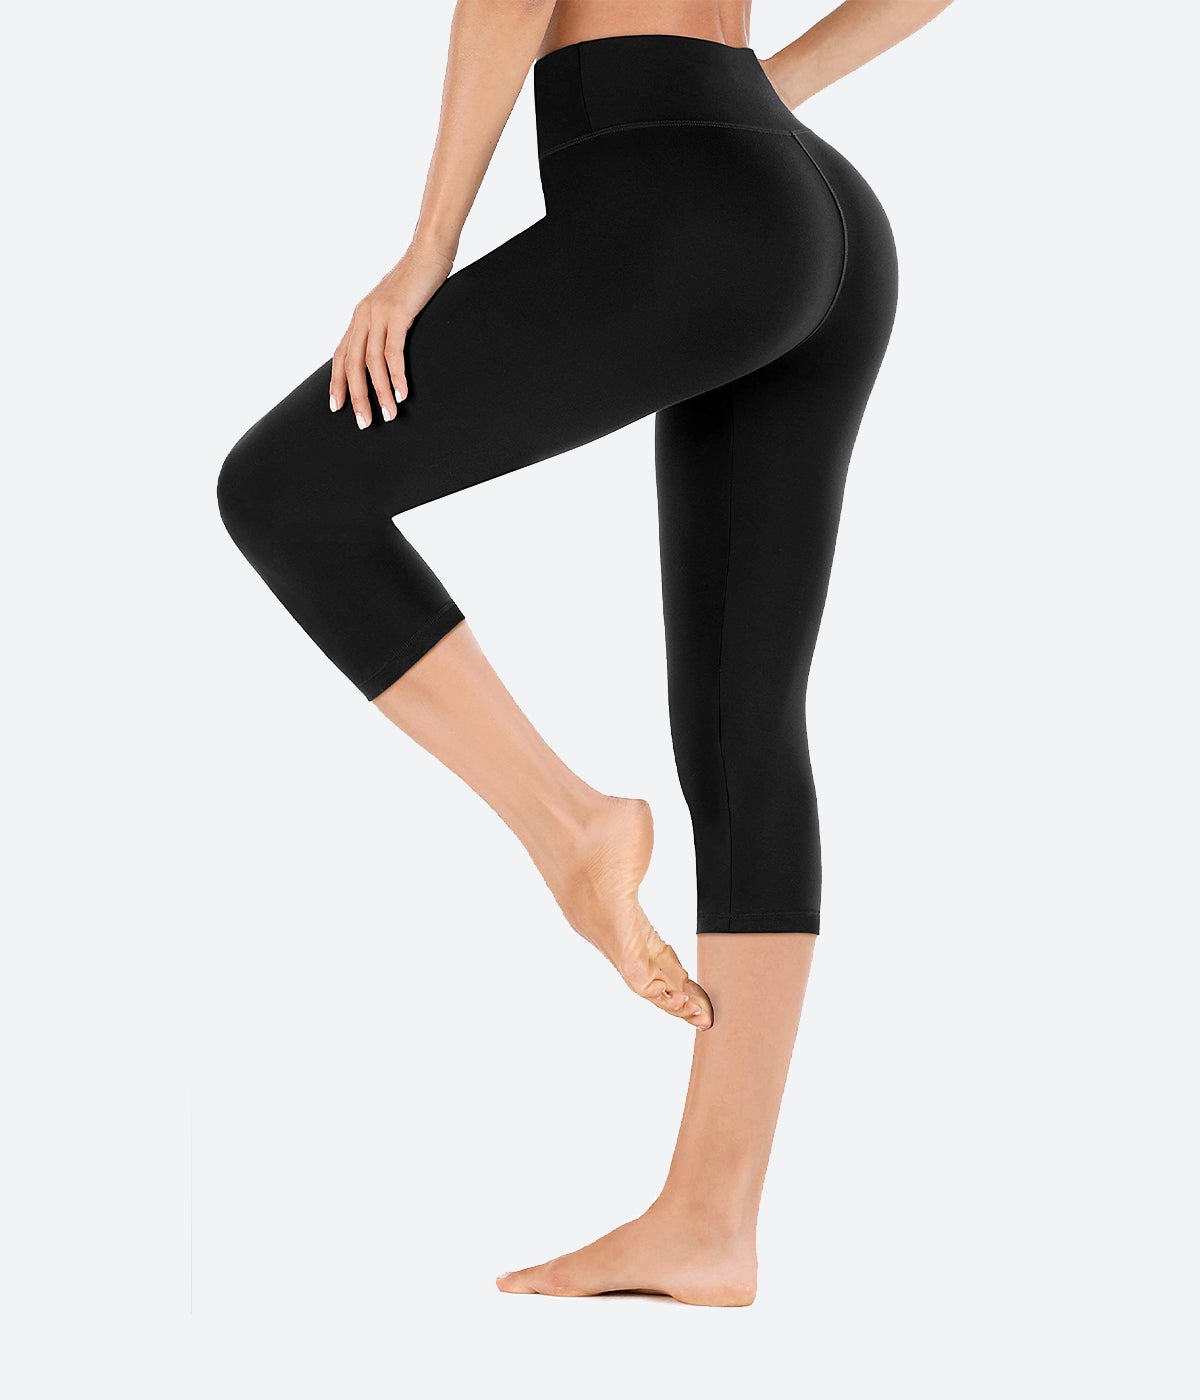 What Are The Differences Between Yoga Pants And Leggings? – Heathyoga